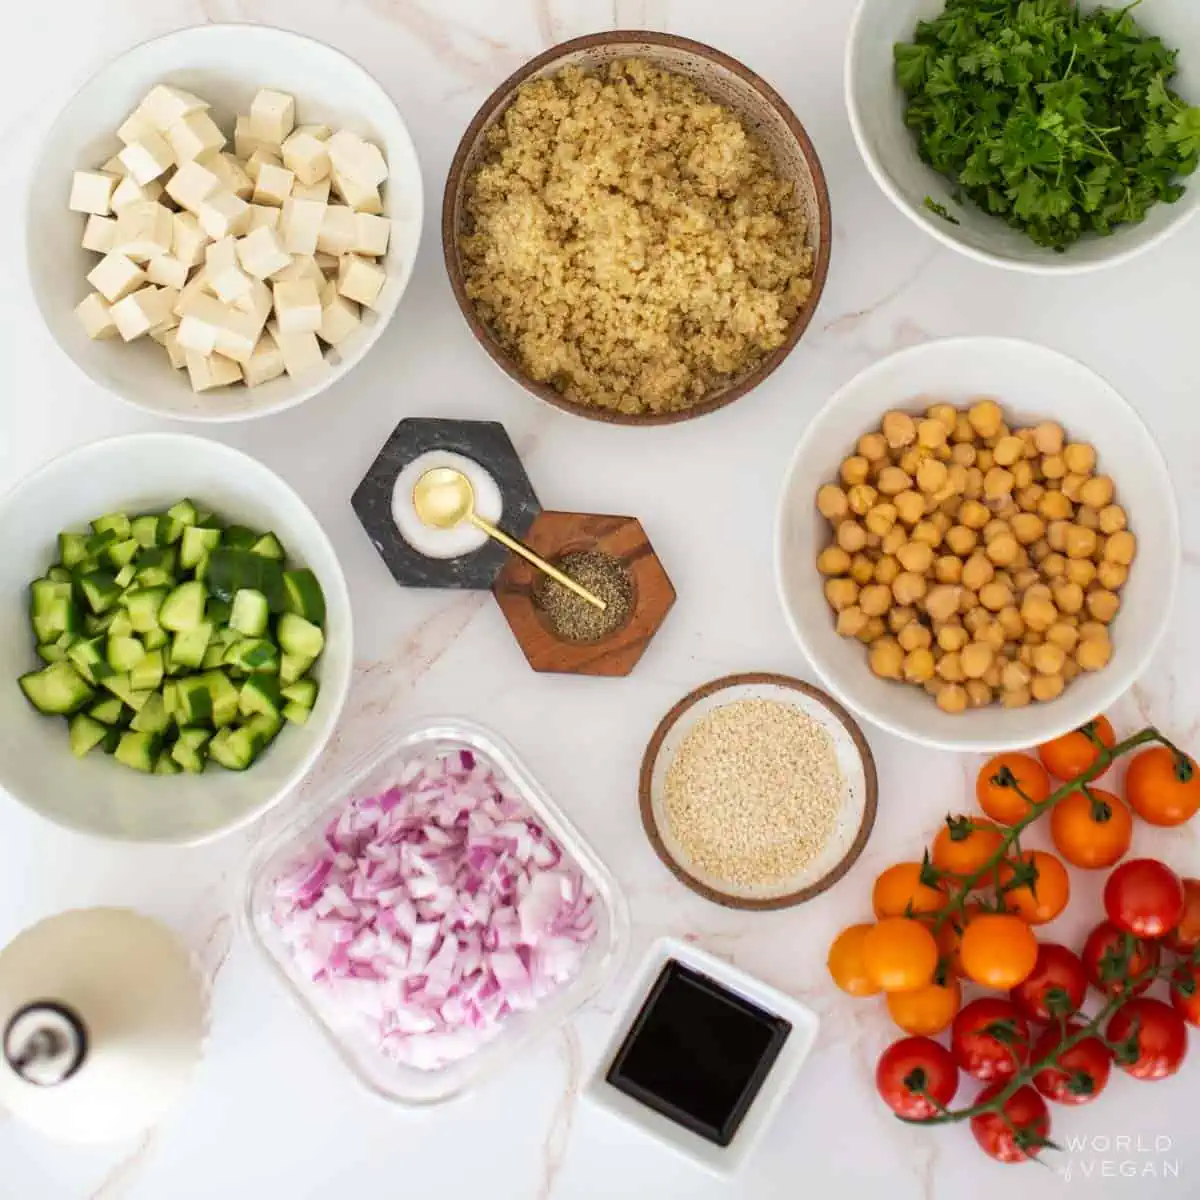 Ingredients for these vegan quinoa salads measured out and placed in individual bowls.